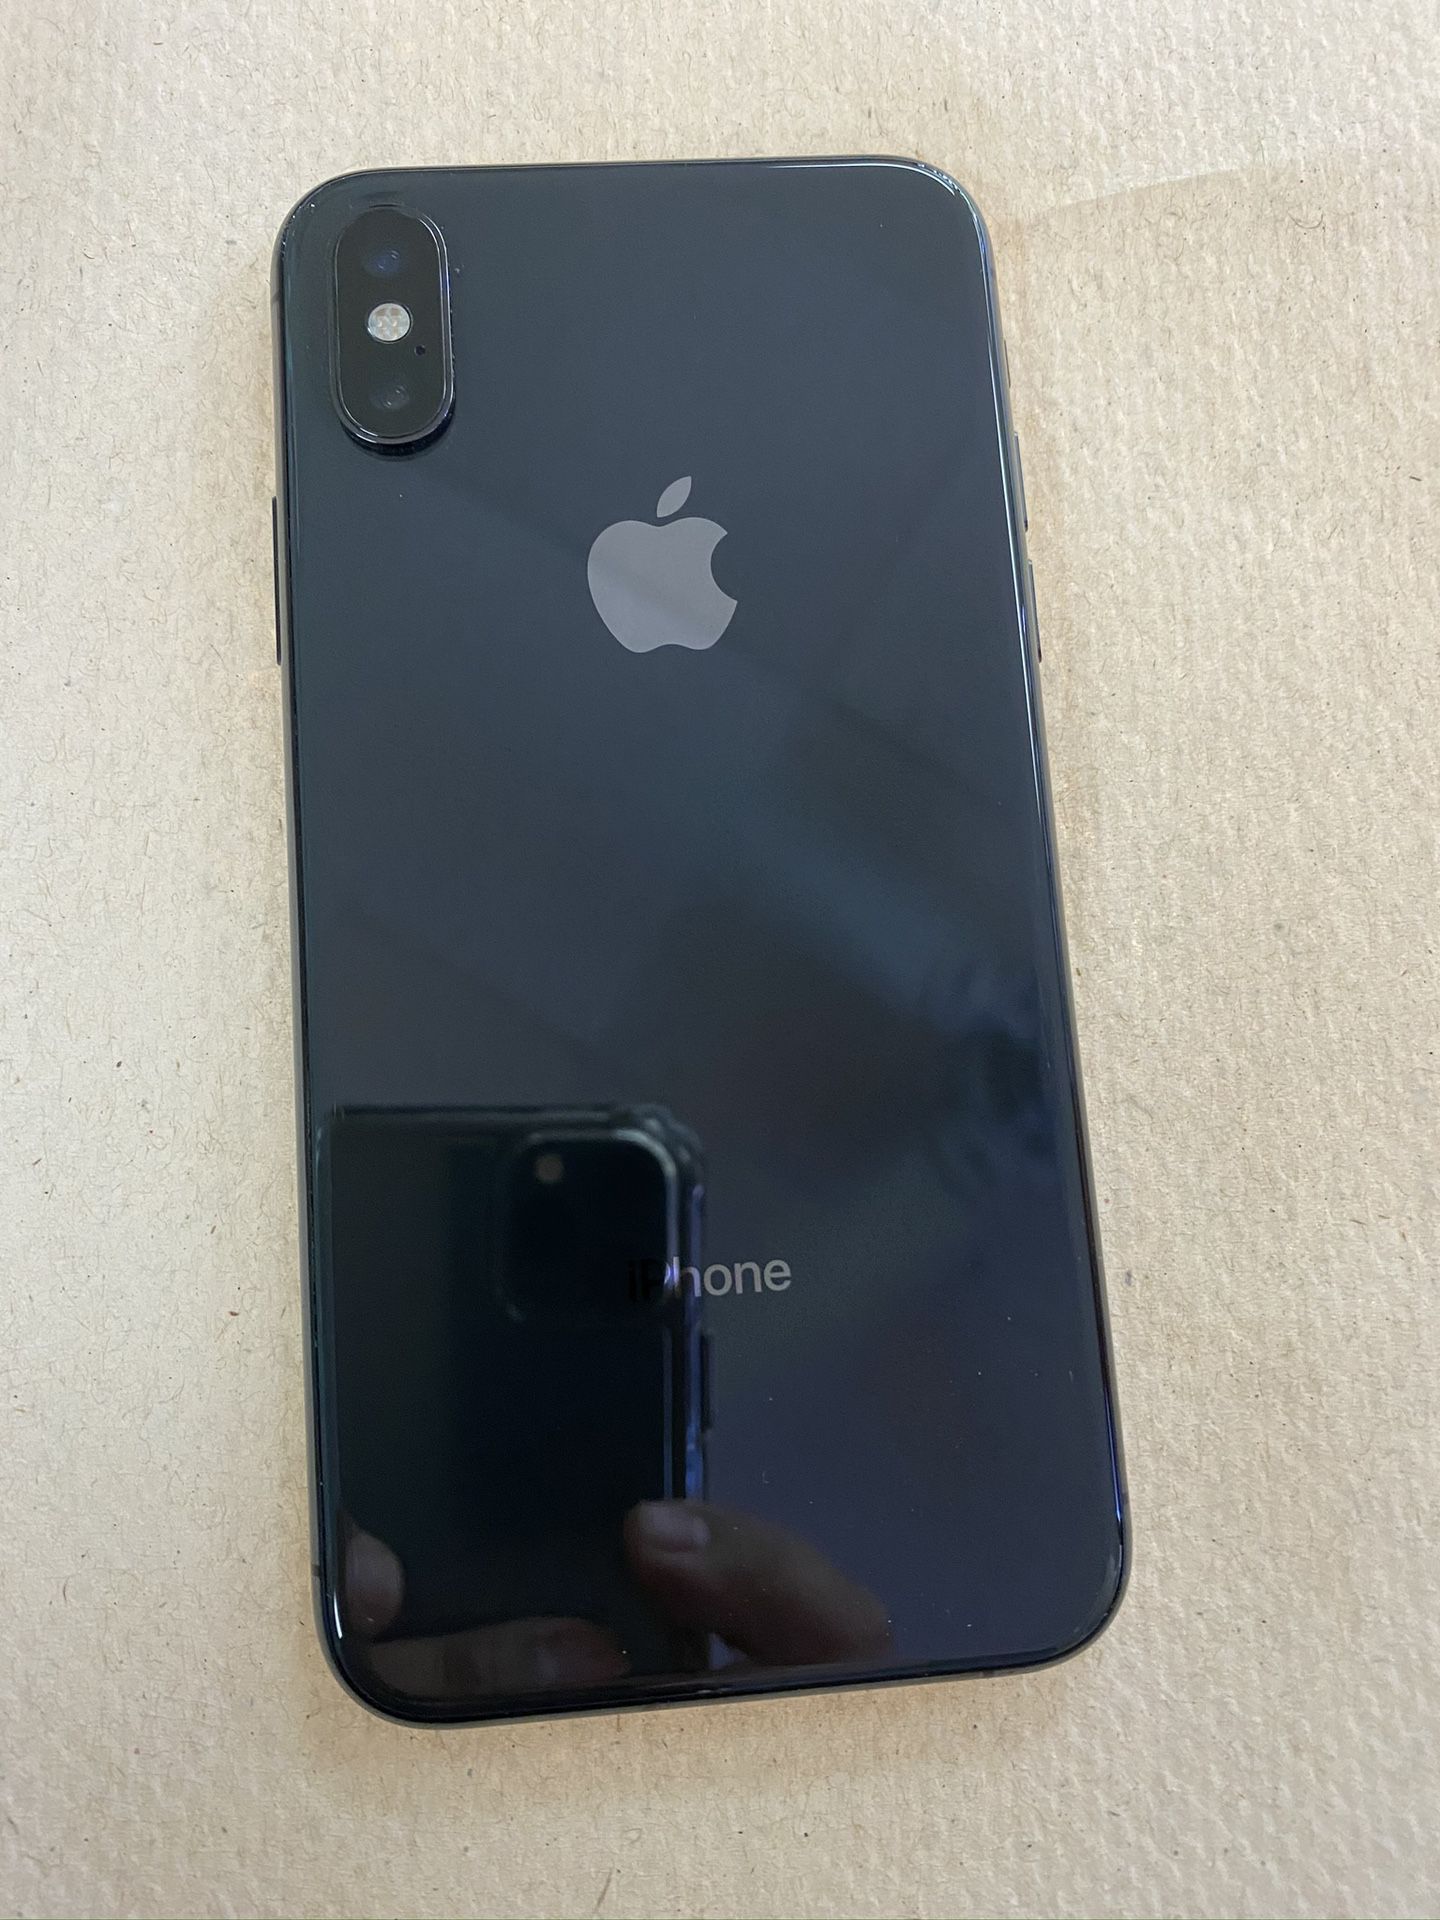 iphone x 64 gb for sprint only,not unlocked excellent overall condition